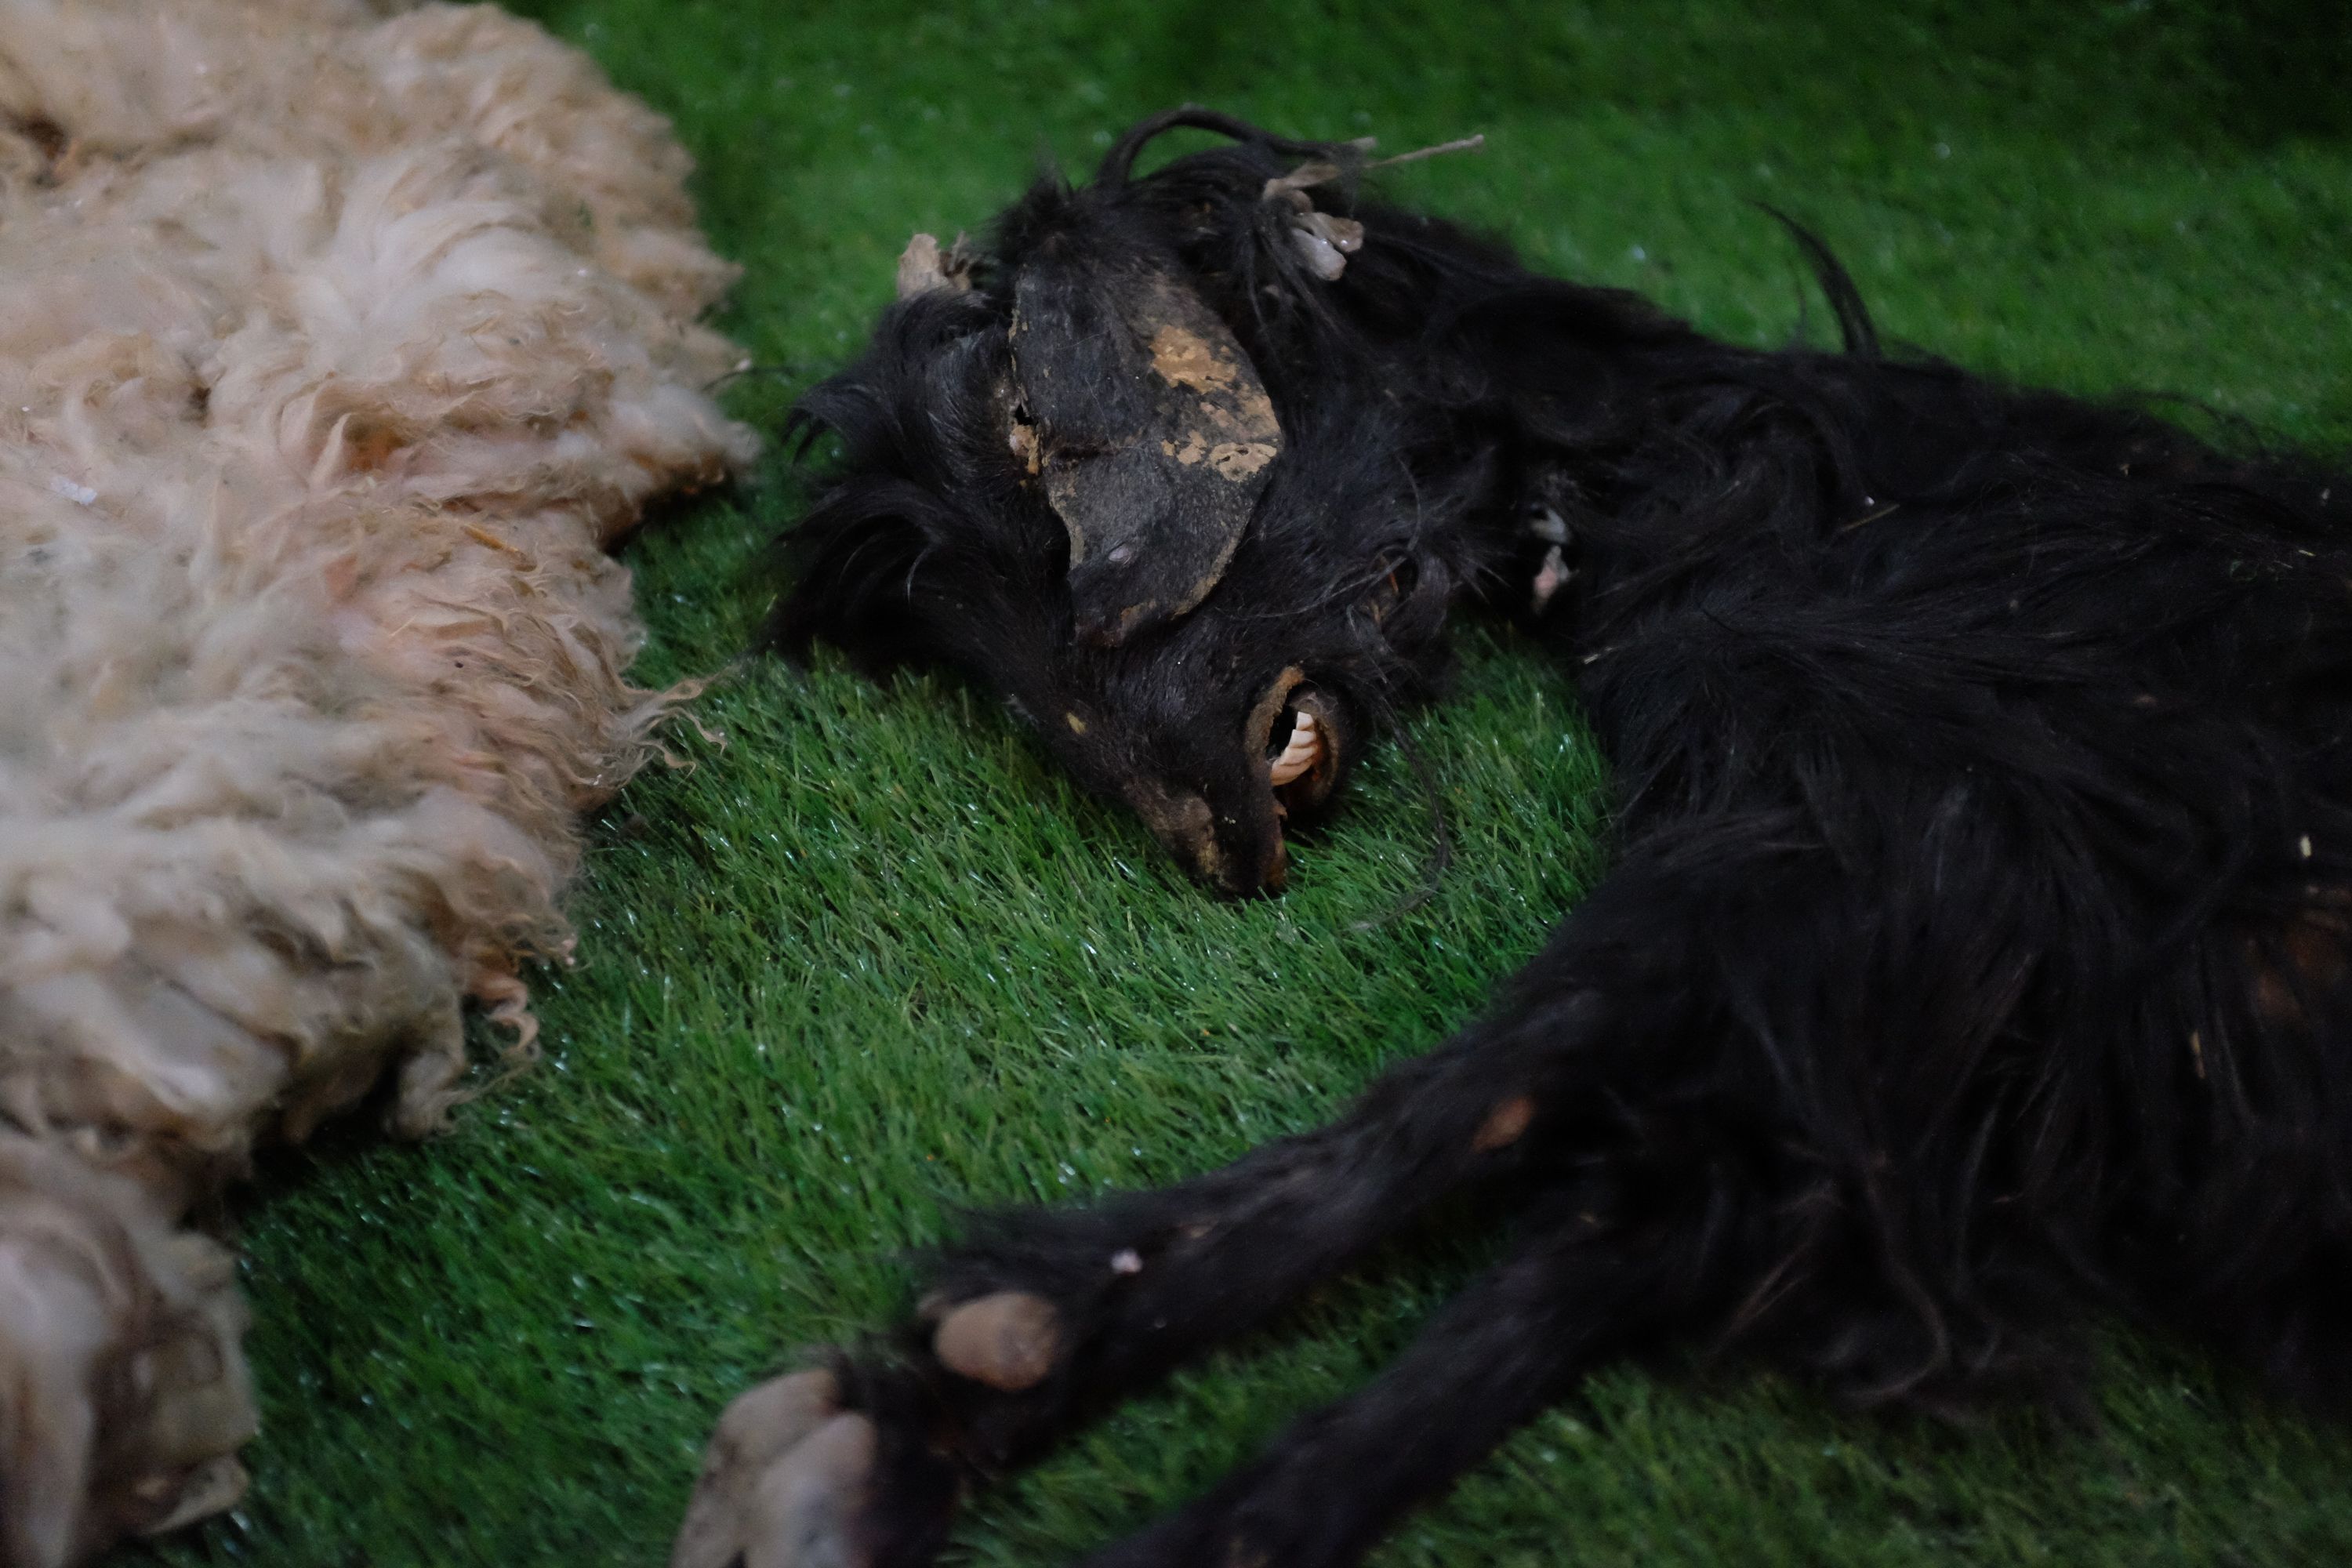 A dead goat lies on green artificial grass next to what looks like a dead sheep.